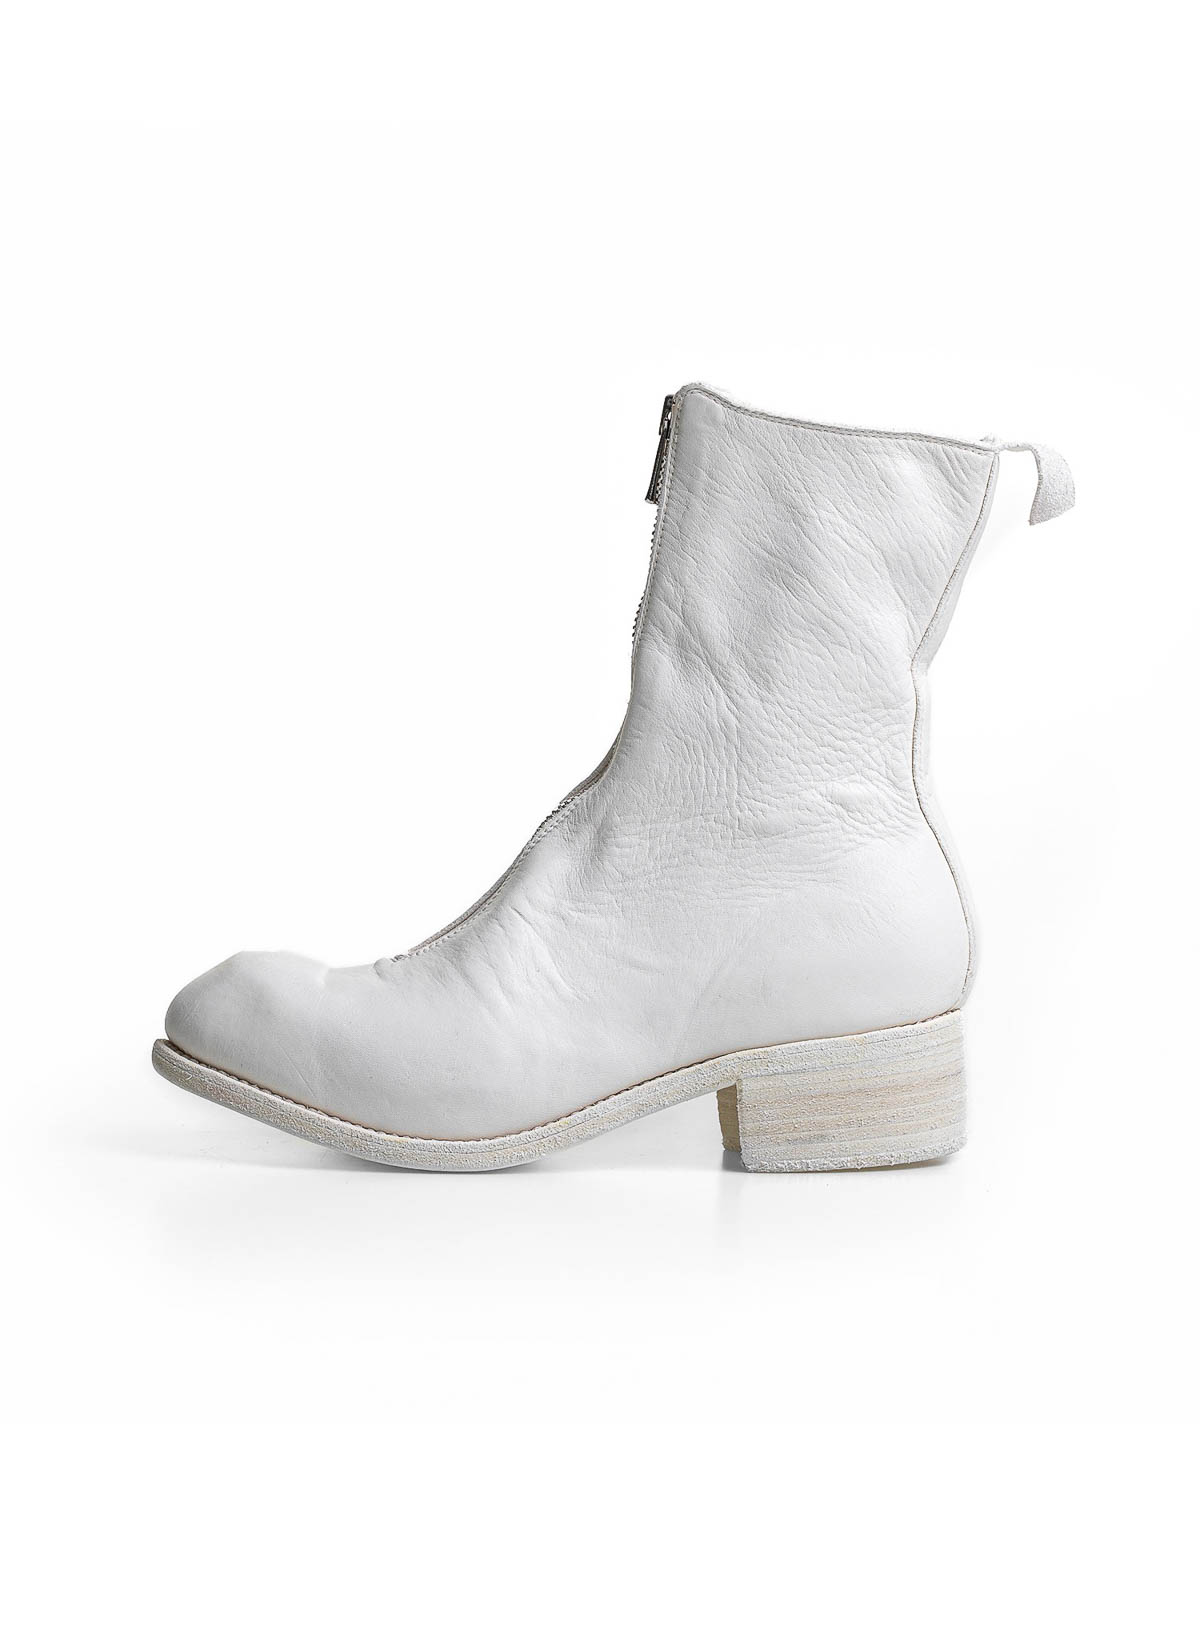 Front Zip Boot, CO00T white horse leather